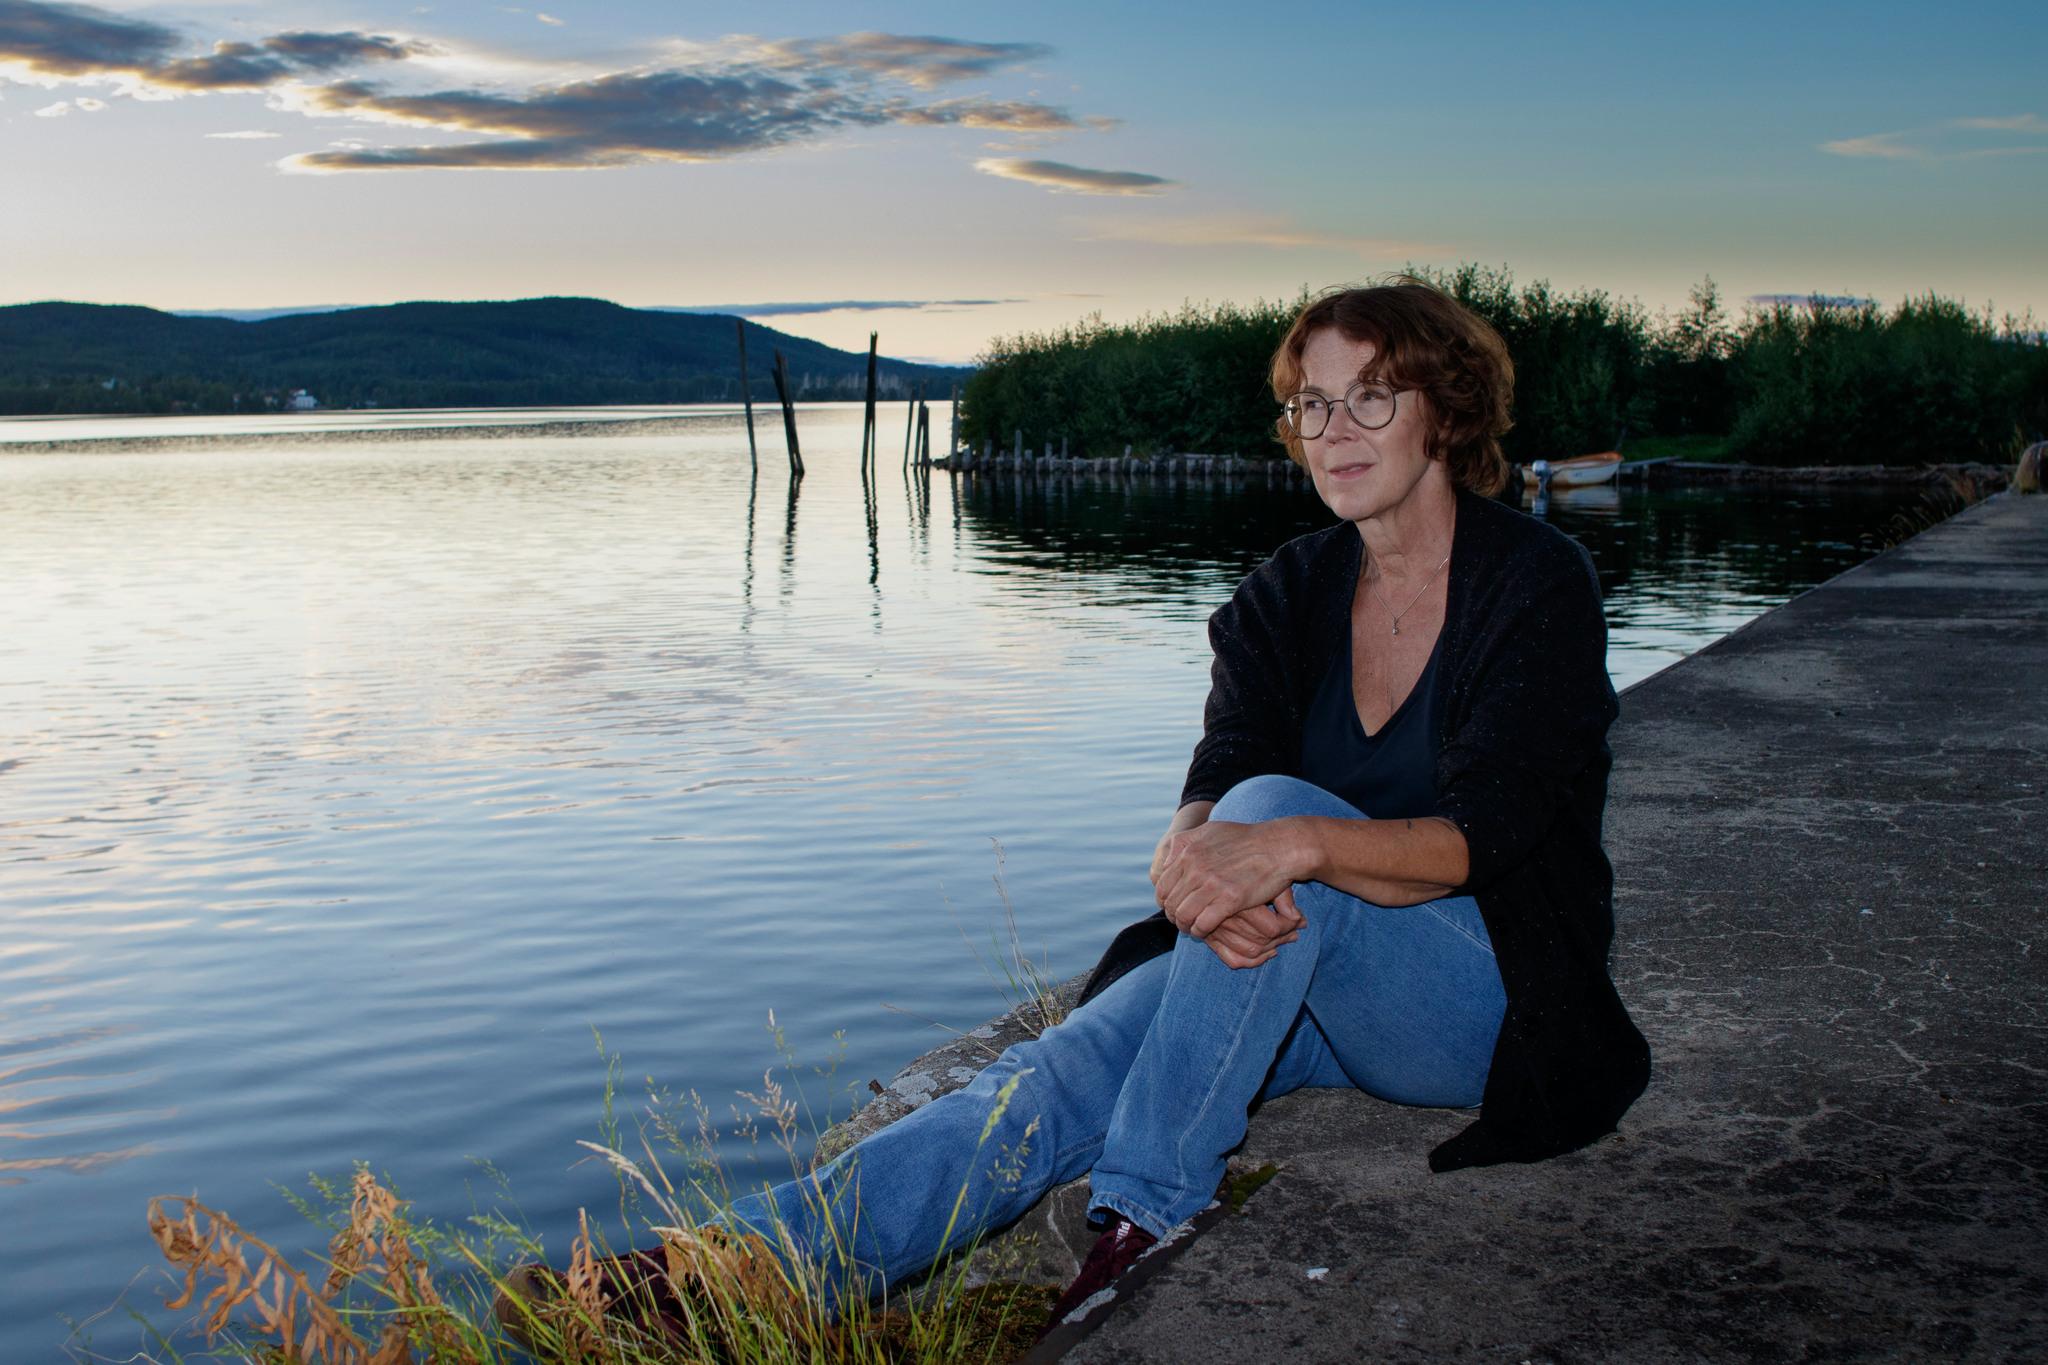 A portrait photo of Tove Alsterdal, sitting on a rock by the water, evening sky in the background.